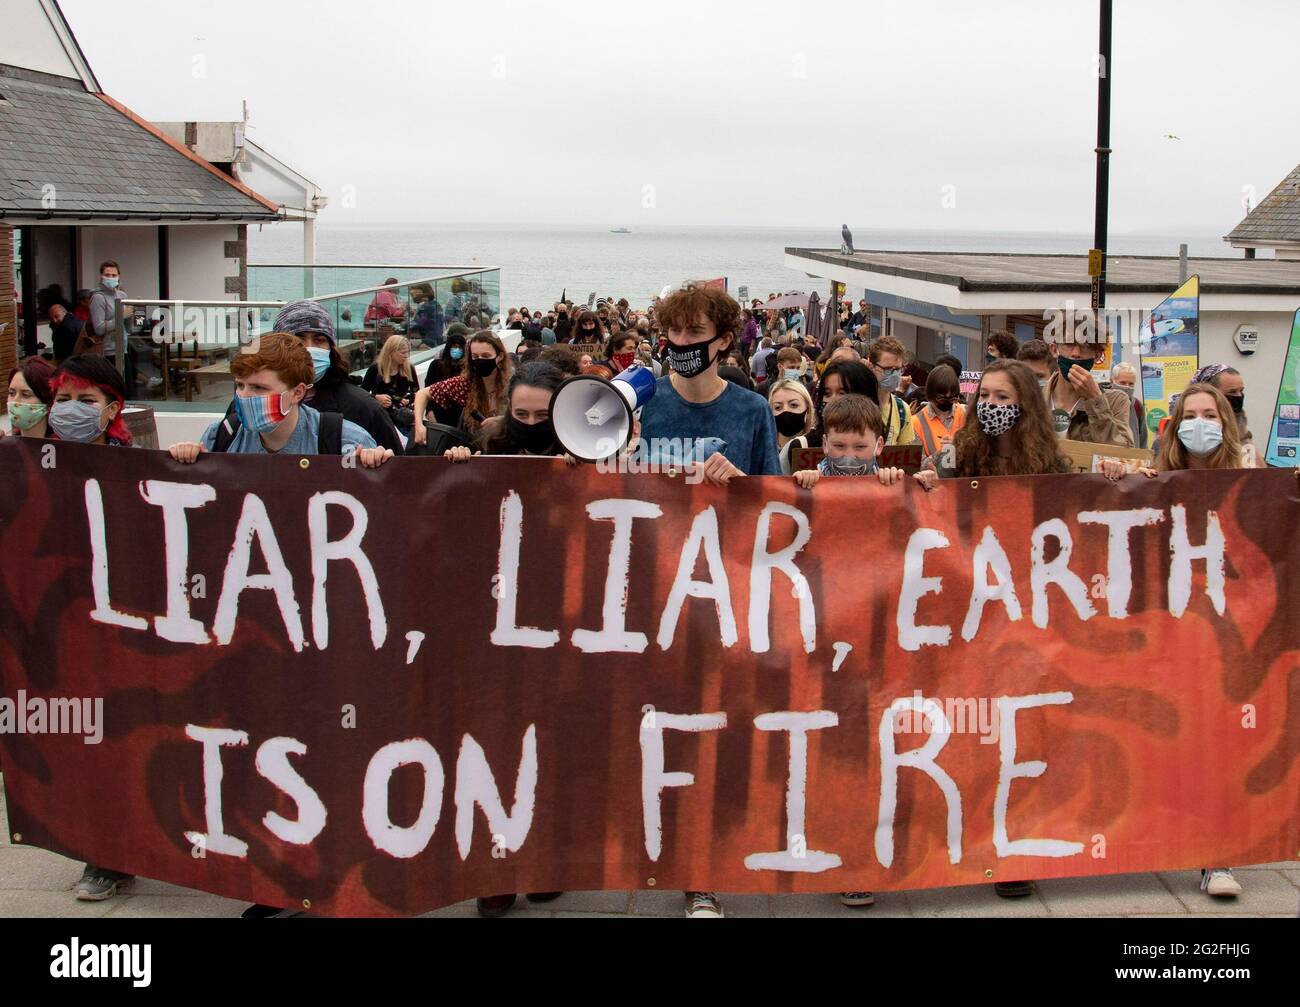 Cornwall, UK. June 11 2021: A group of protesters march off Gyllyngvase beach and into Falmouth, Cornwall, as part of the Youth Strike for Climate, ahead of the G7 summit happening at the weekend. 11th June 2021. Anna Hatfield/Pathos Credit: One Up Top Editorial Images/Alamy Live News Stock Photo